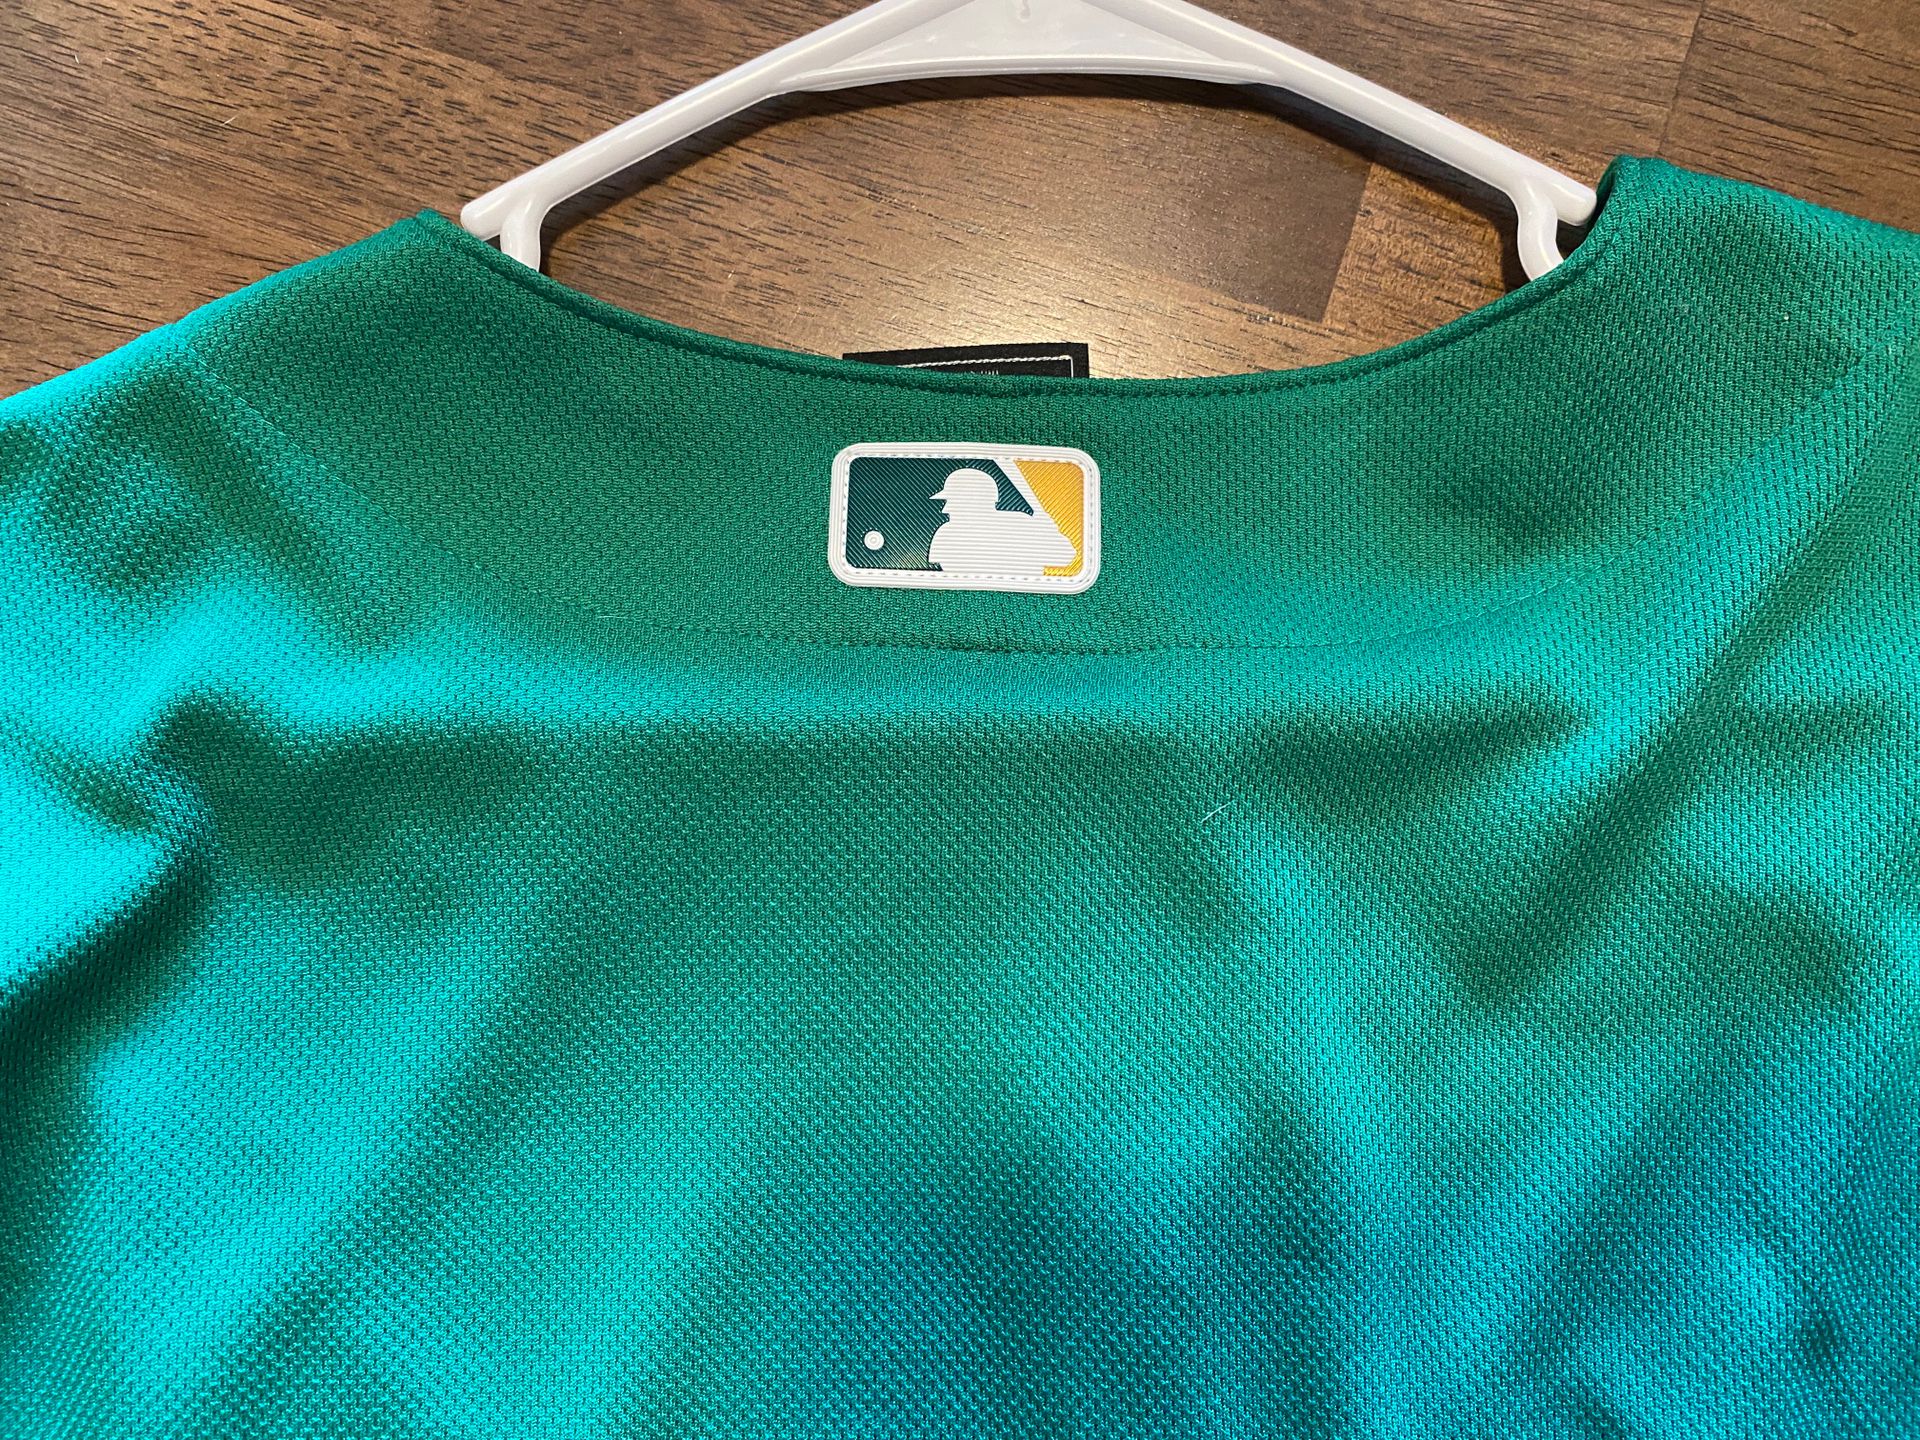 Oakland Athletics Nike Road Cooperstown Collection Team Jersey - Kelly Green